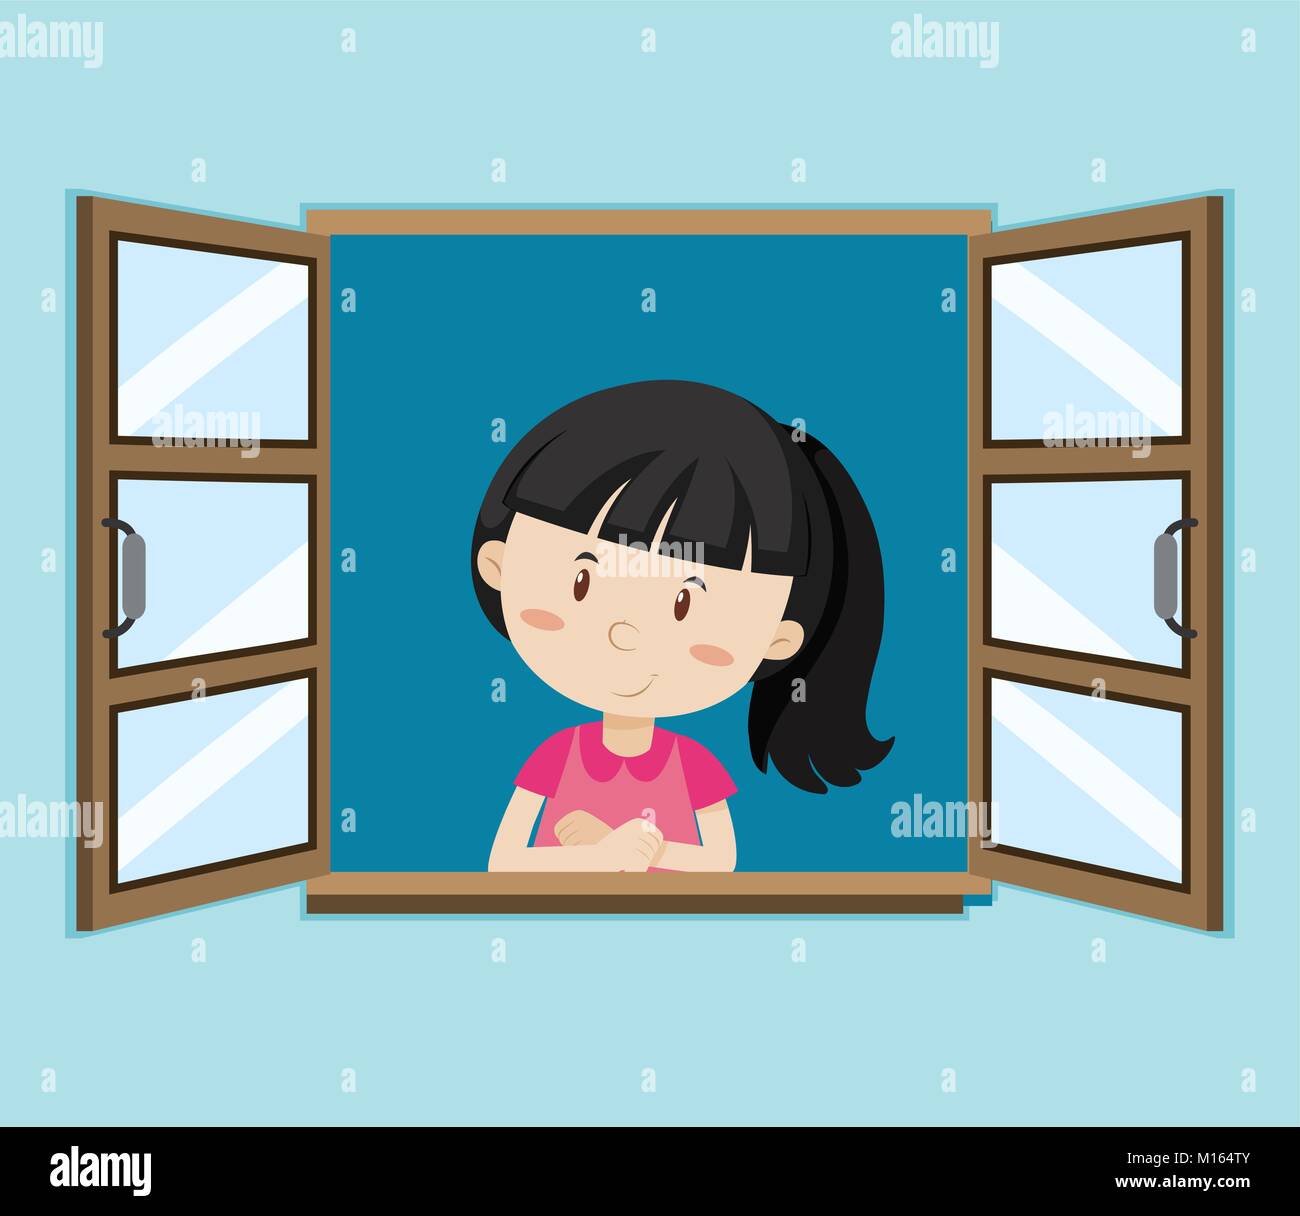 Happy girl by the window illustration Stock Vector